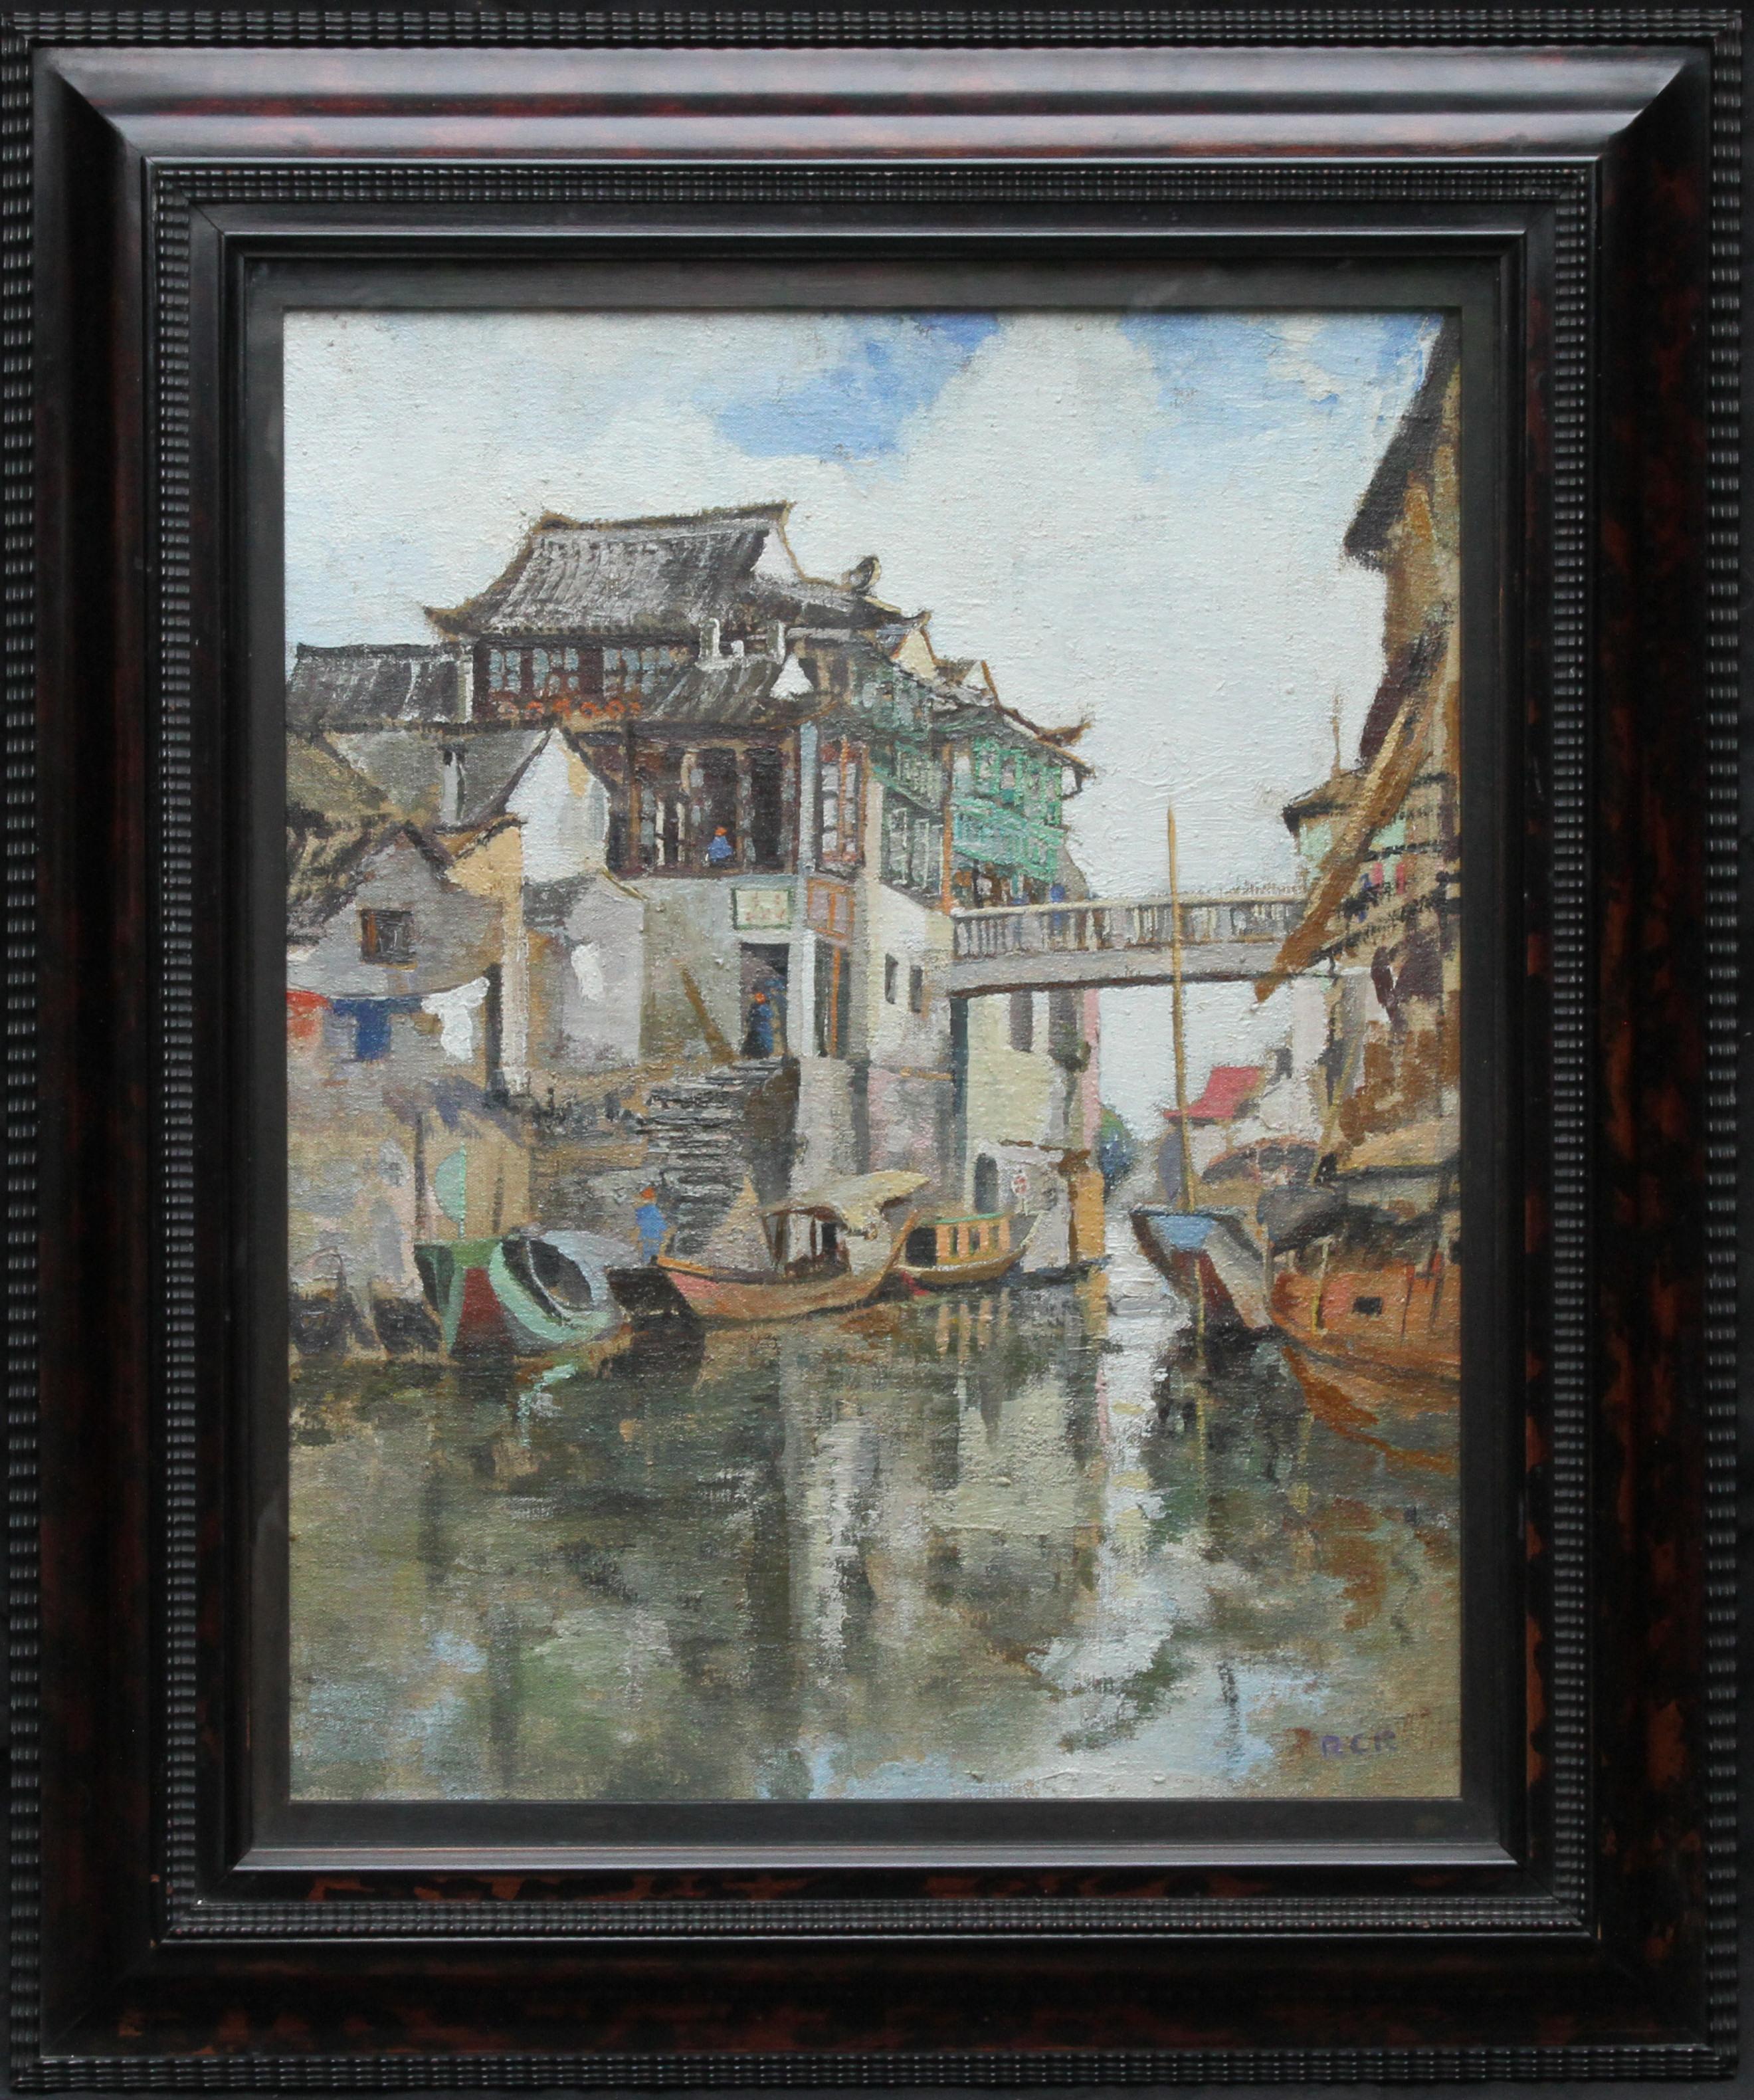 Robert Cecil Robertson Landscape Painting - Soochow/Suzchou China - Scottish 20's Impressionist art oil painting canal China